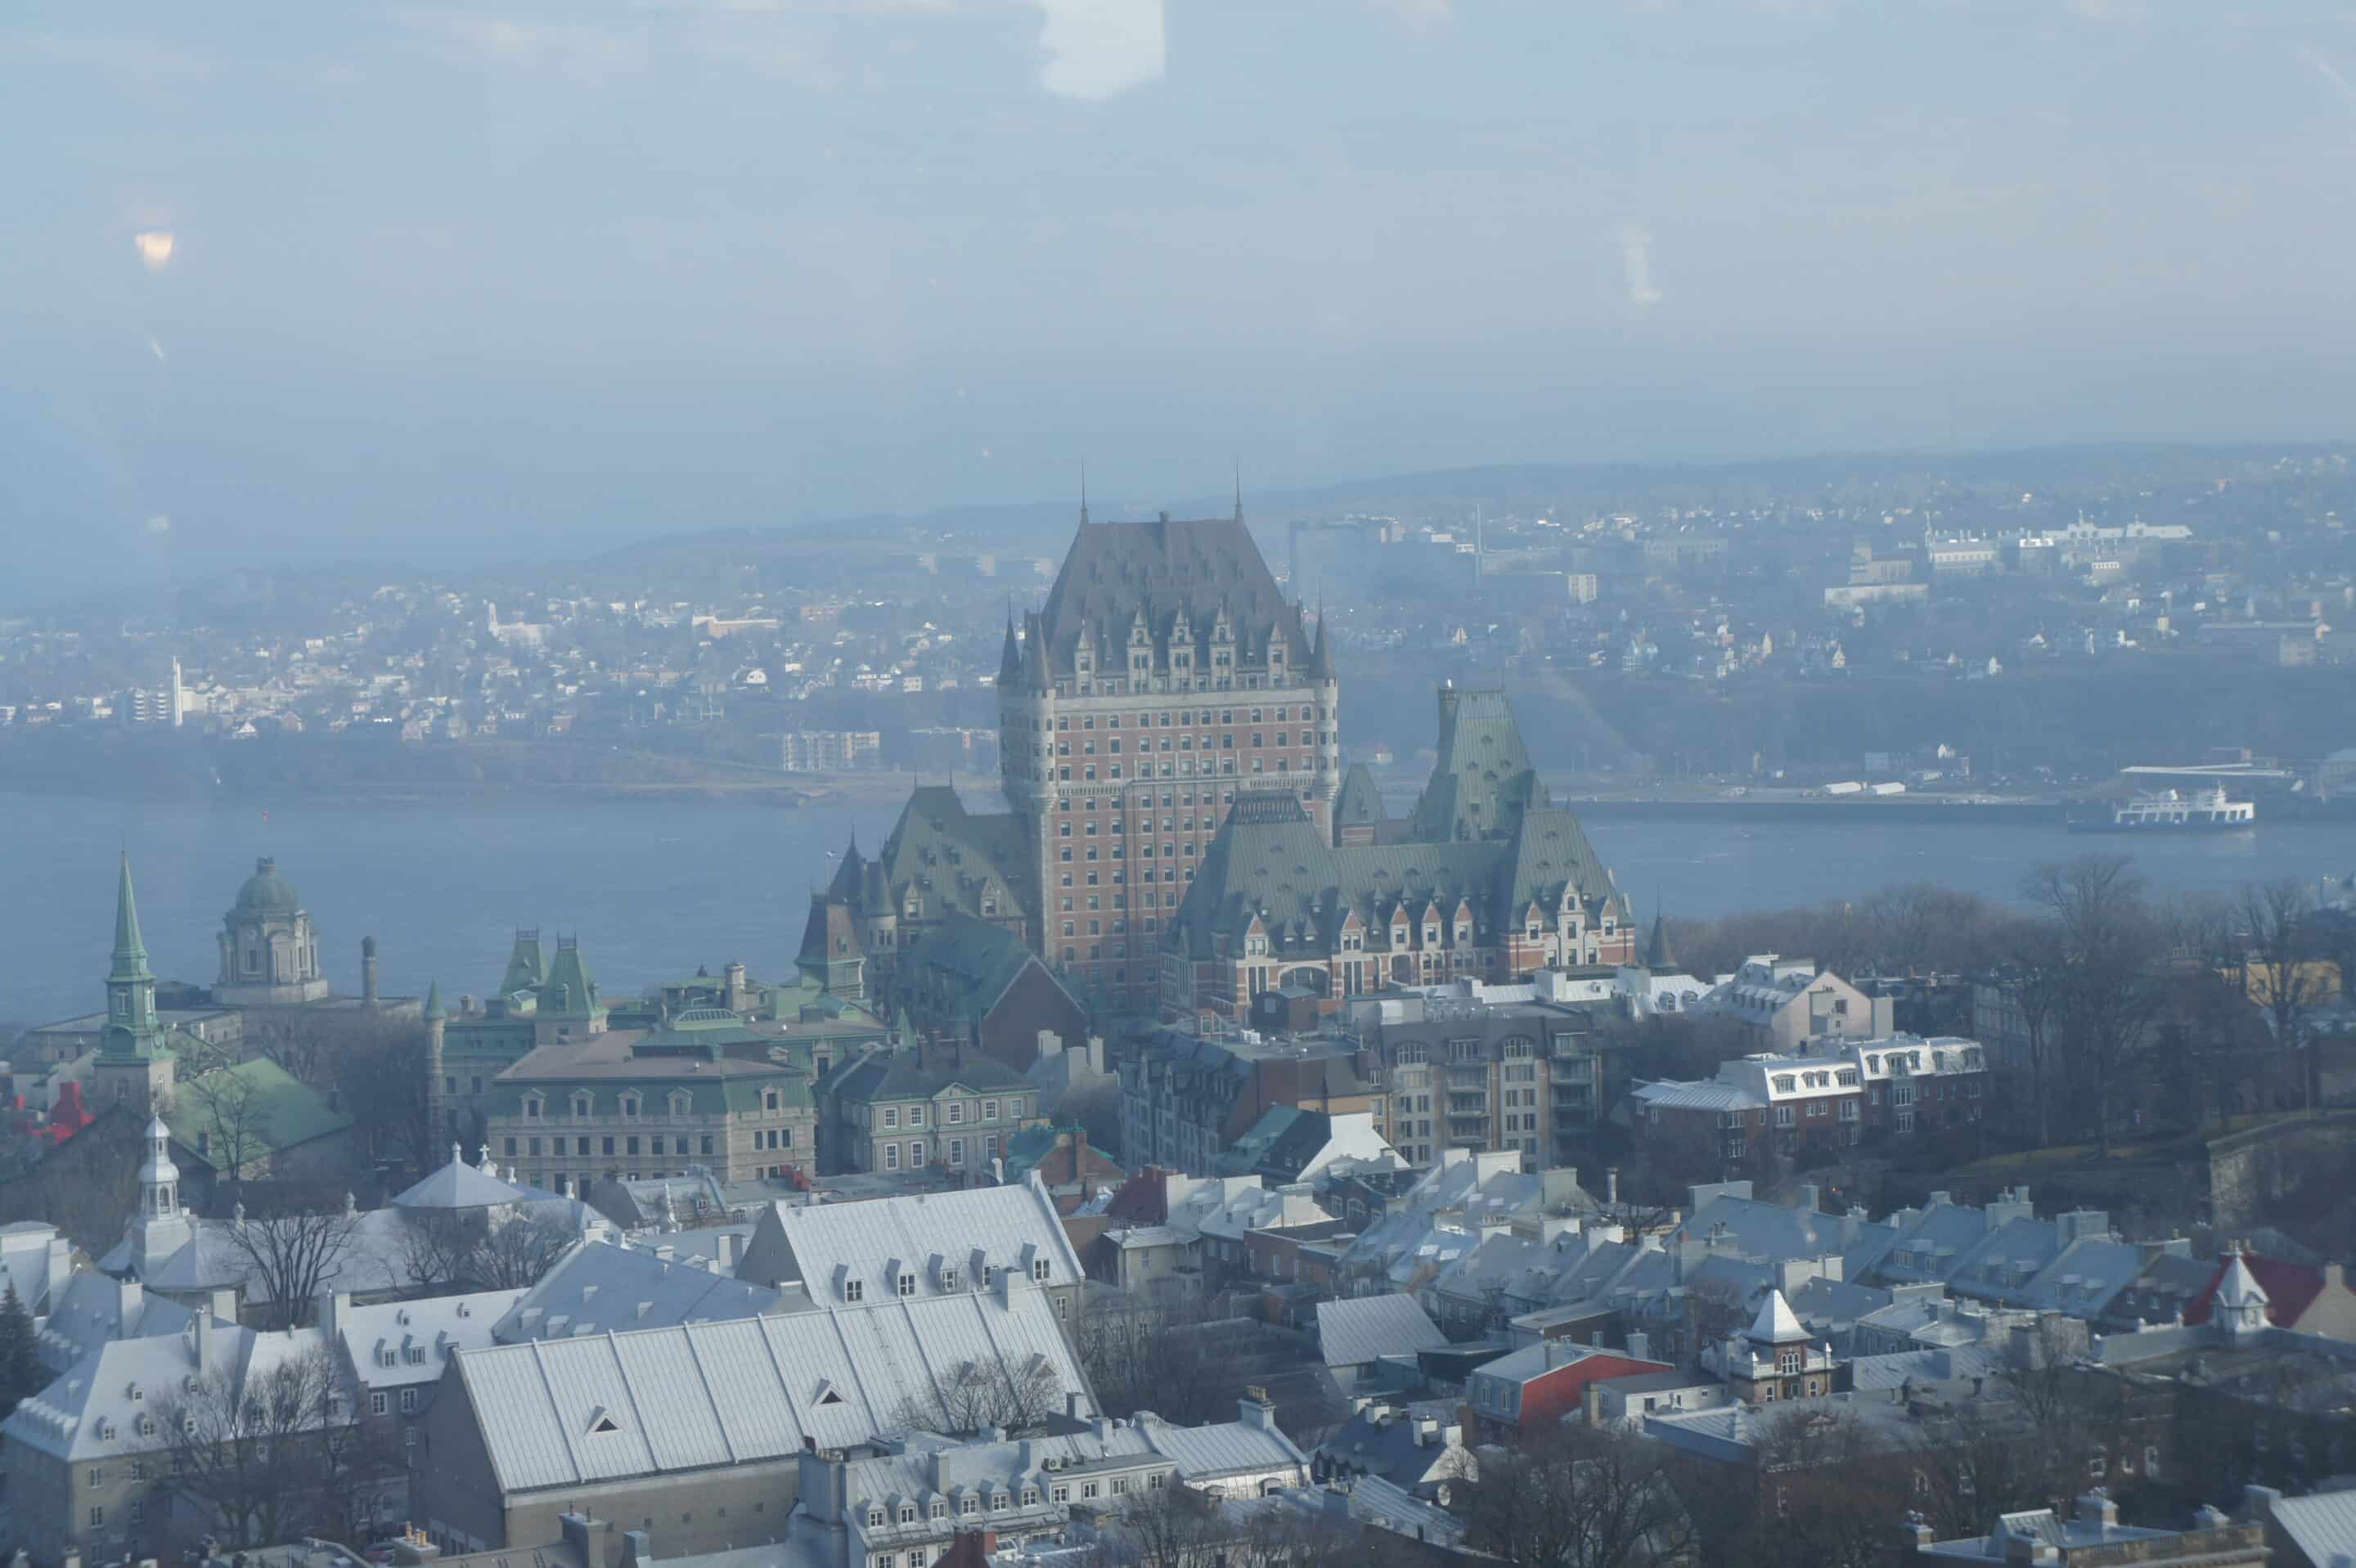 Quebec City from the Hilton 23rd